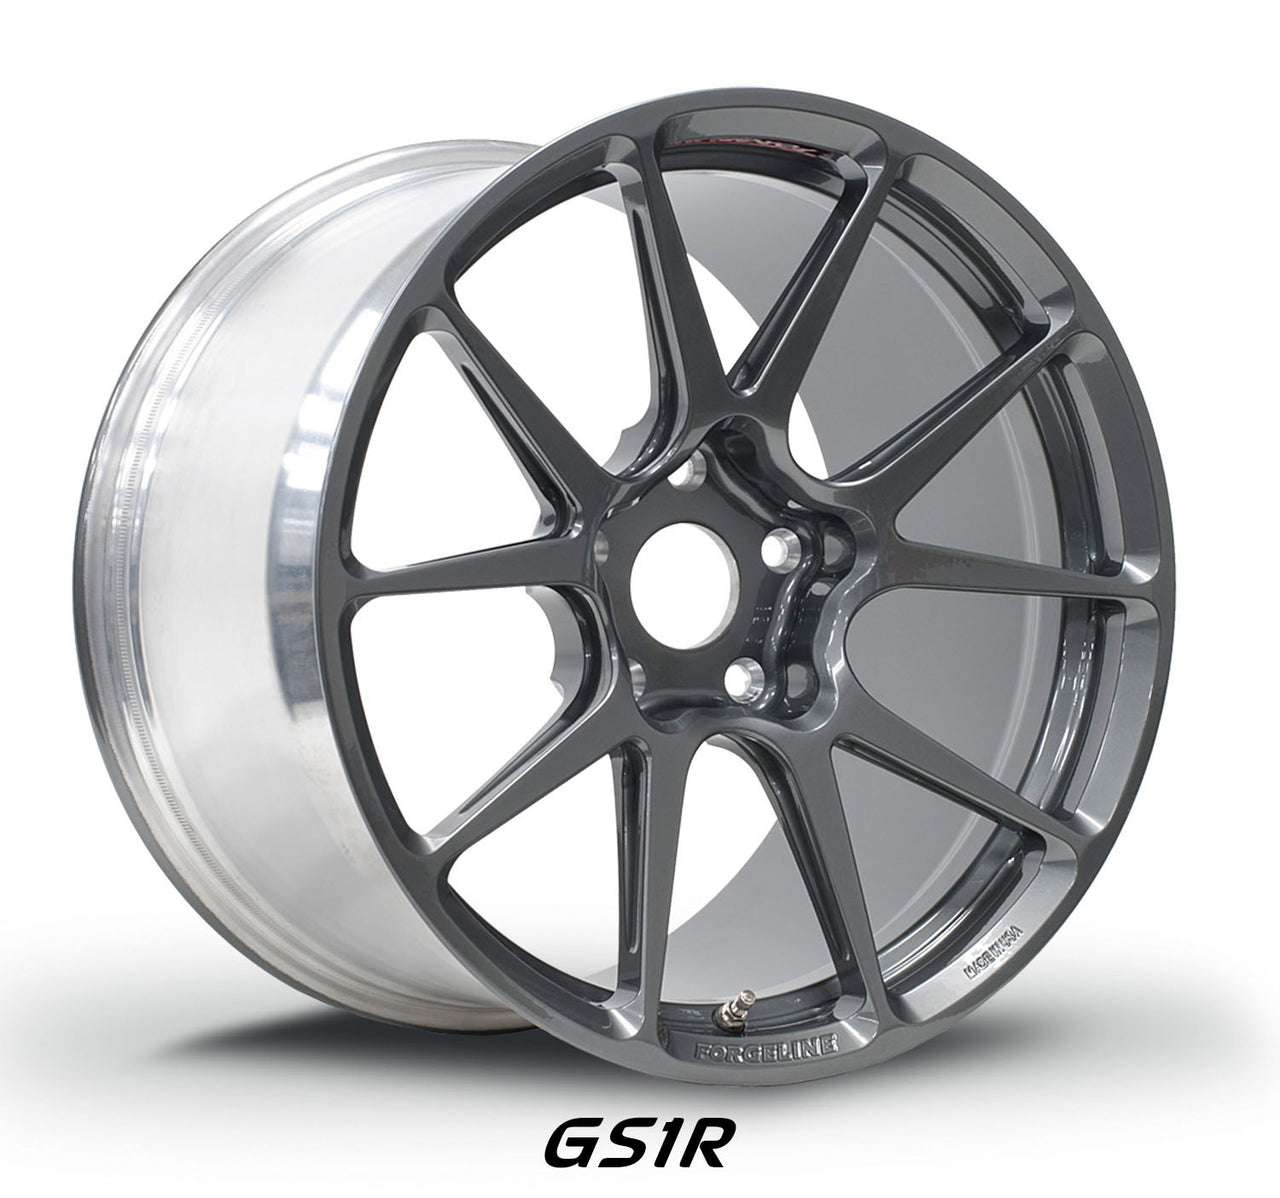 Forgeline Wheels GS1R in Pearl Gray perfect fit for McLaren 540 570 650S 675LT 720S for motorsports and track days